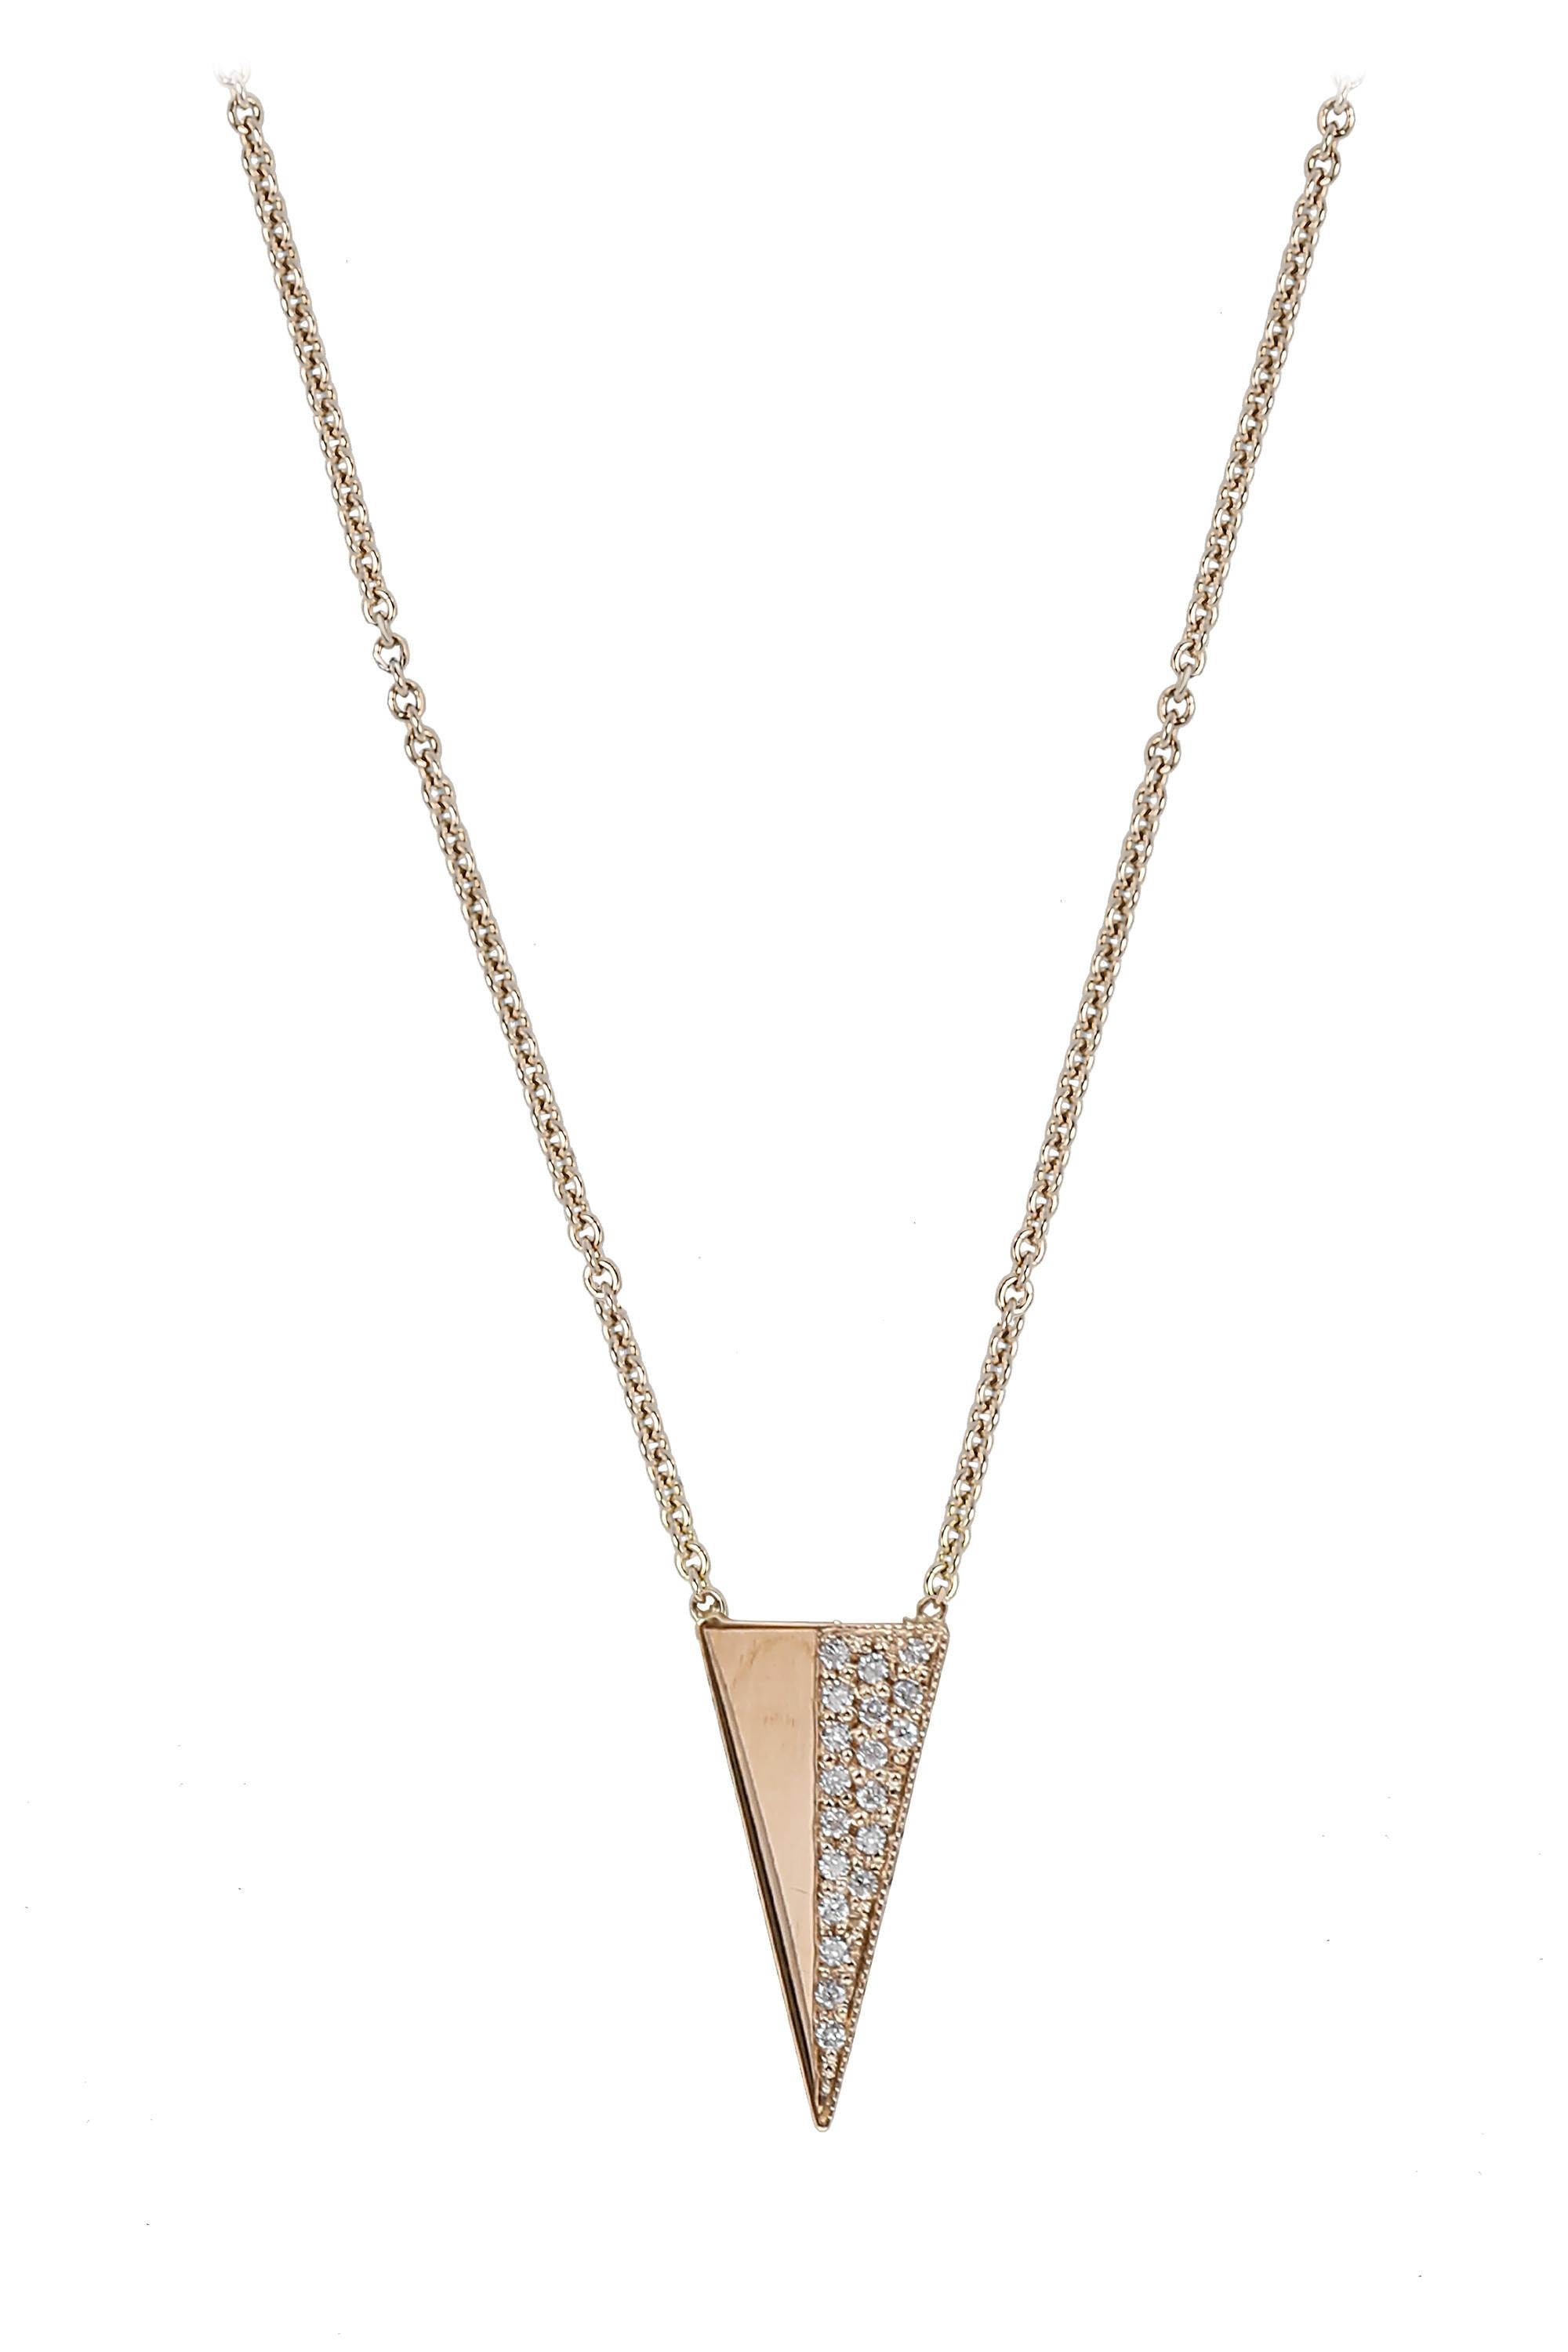 Nineteen round brilliant bead set diamonds weighing approximately .19 carats, light up one half of a polished triangle pendant suspended from a refined 18 “cable chain. A very stylish statement crafted in 14 karat yellow gold.